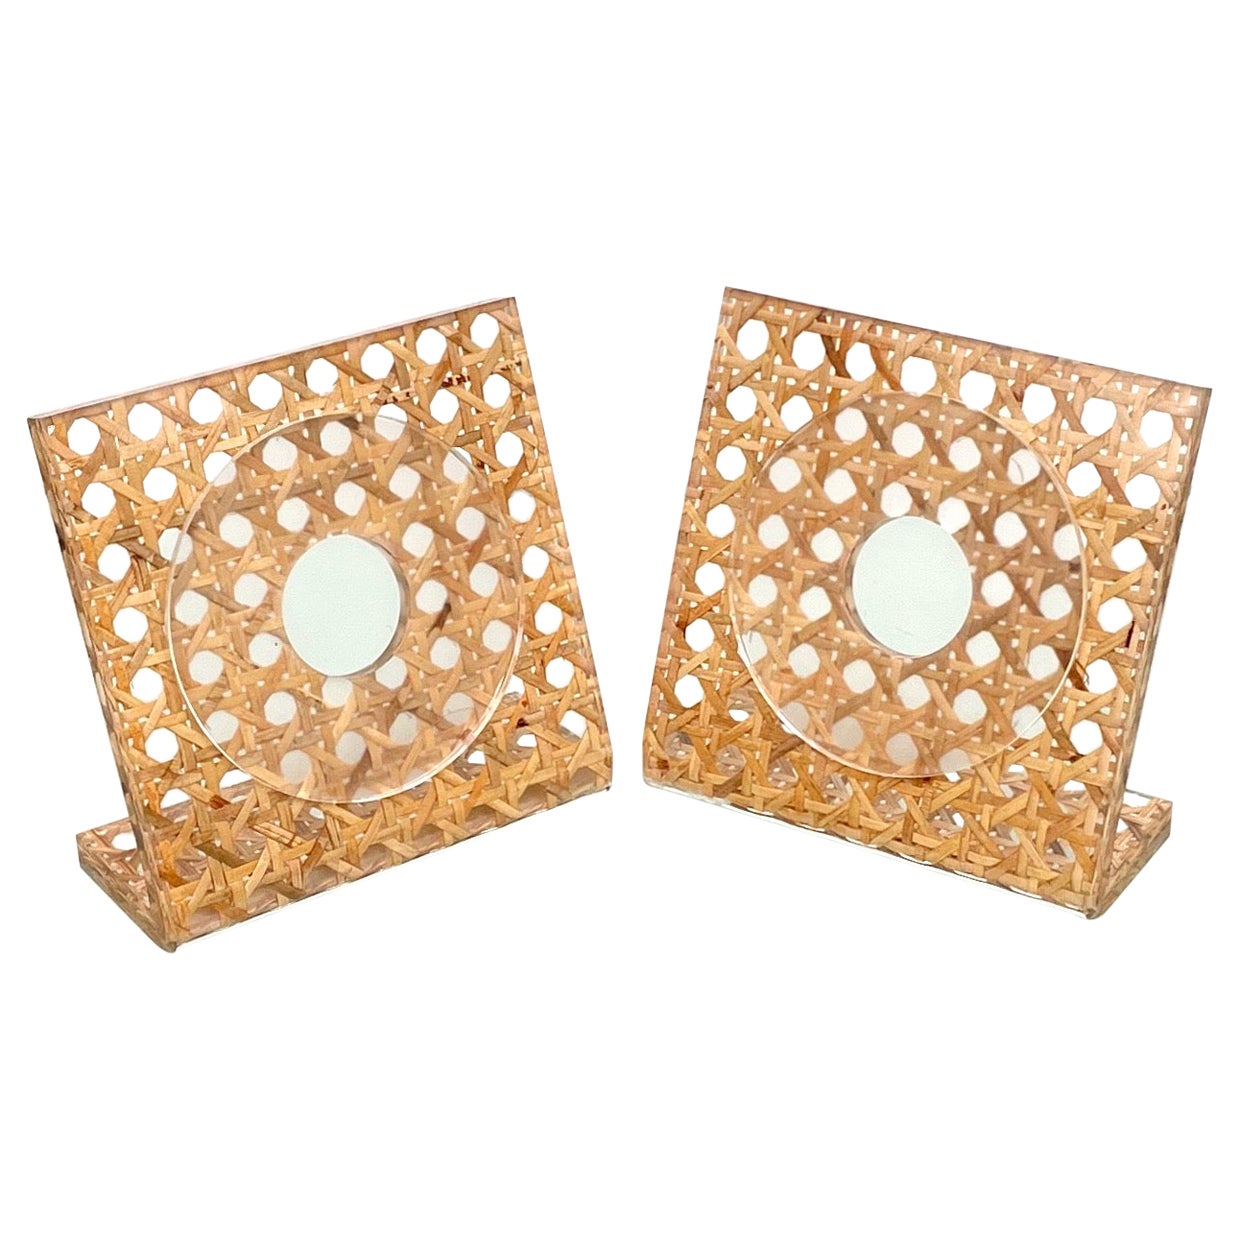 Pair of Lucite & Rattan Squared Picture Frame Christian Dior Style, Italy, 1970s